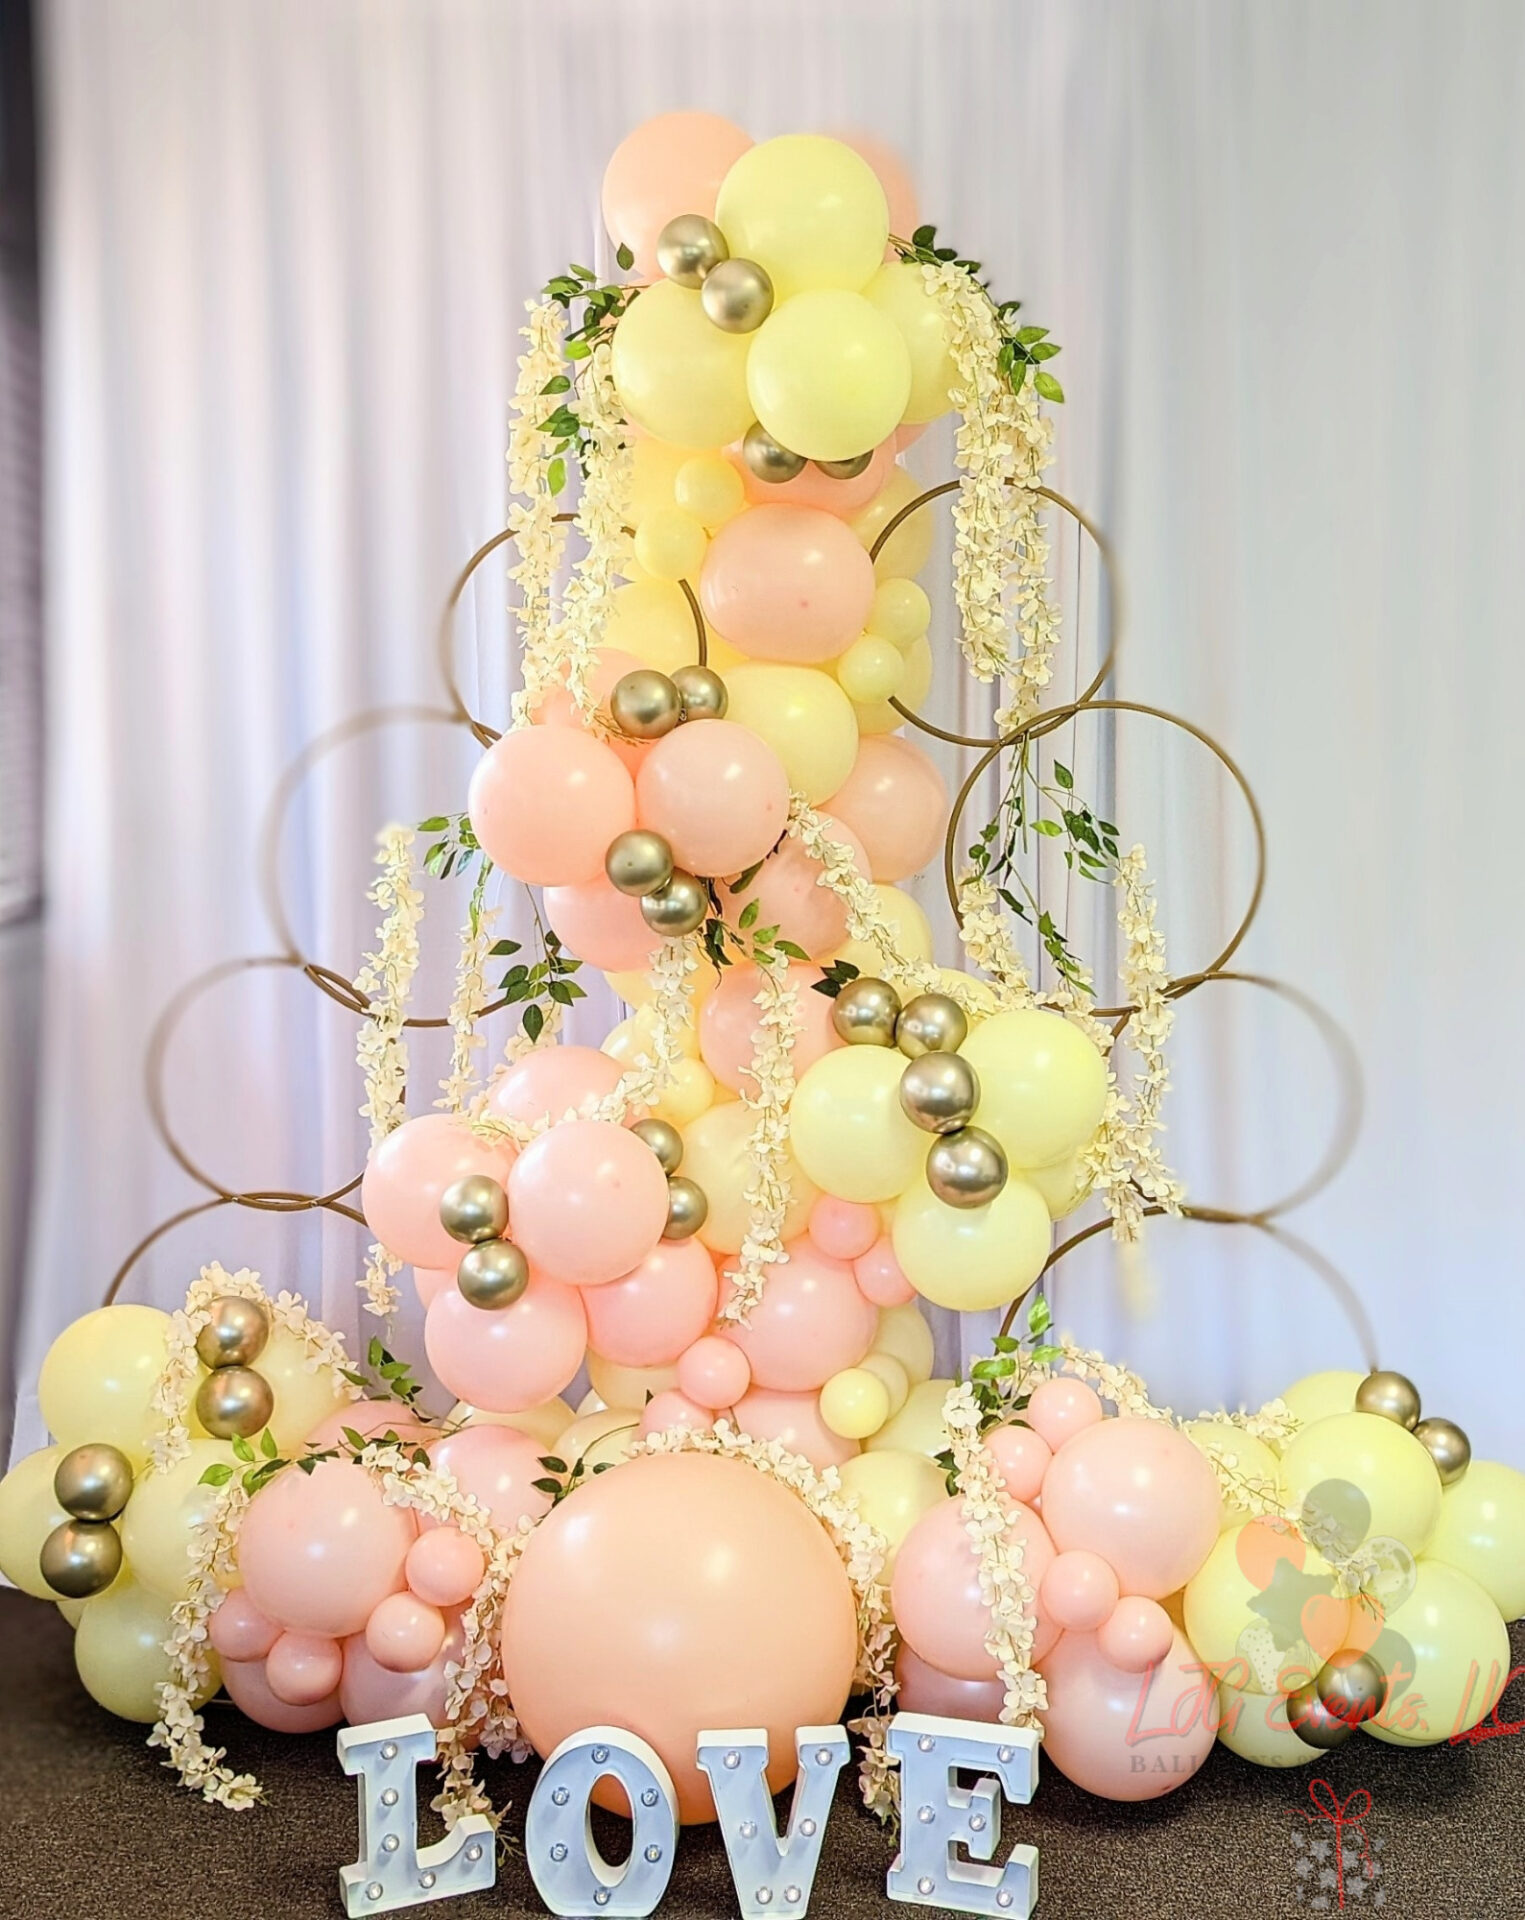 A beautiful balloon sculpture with gold rings around it and the words "LOVE" under it.